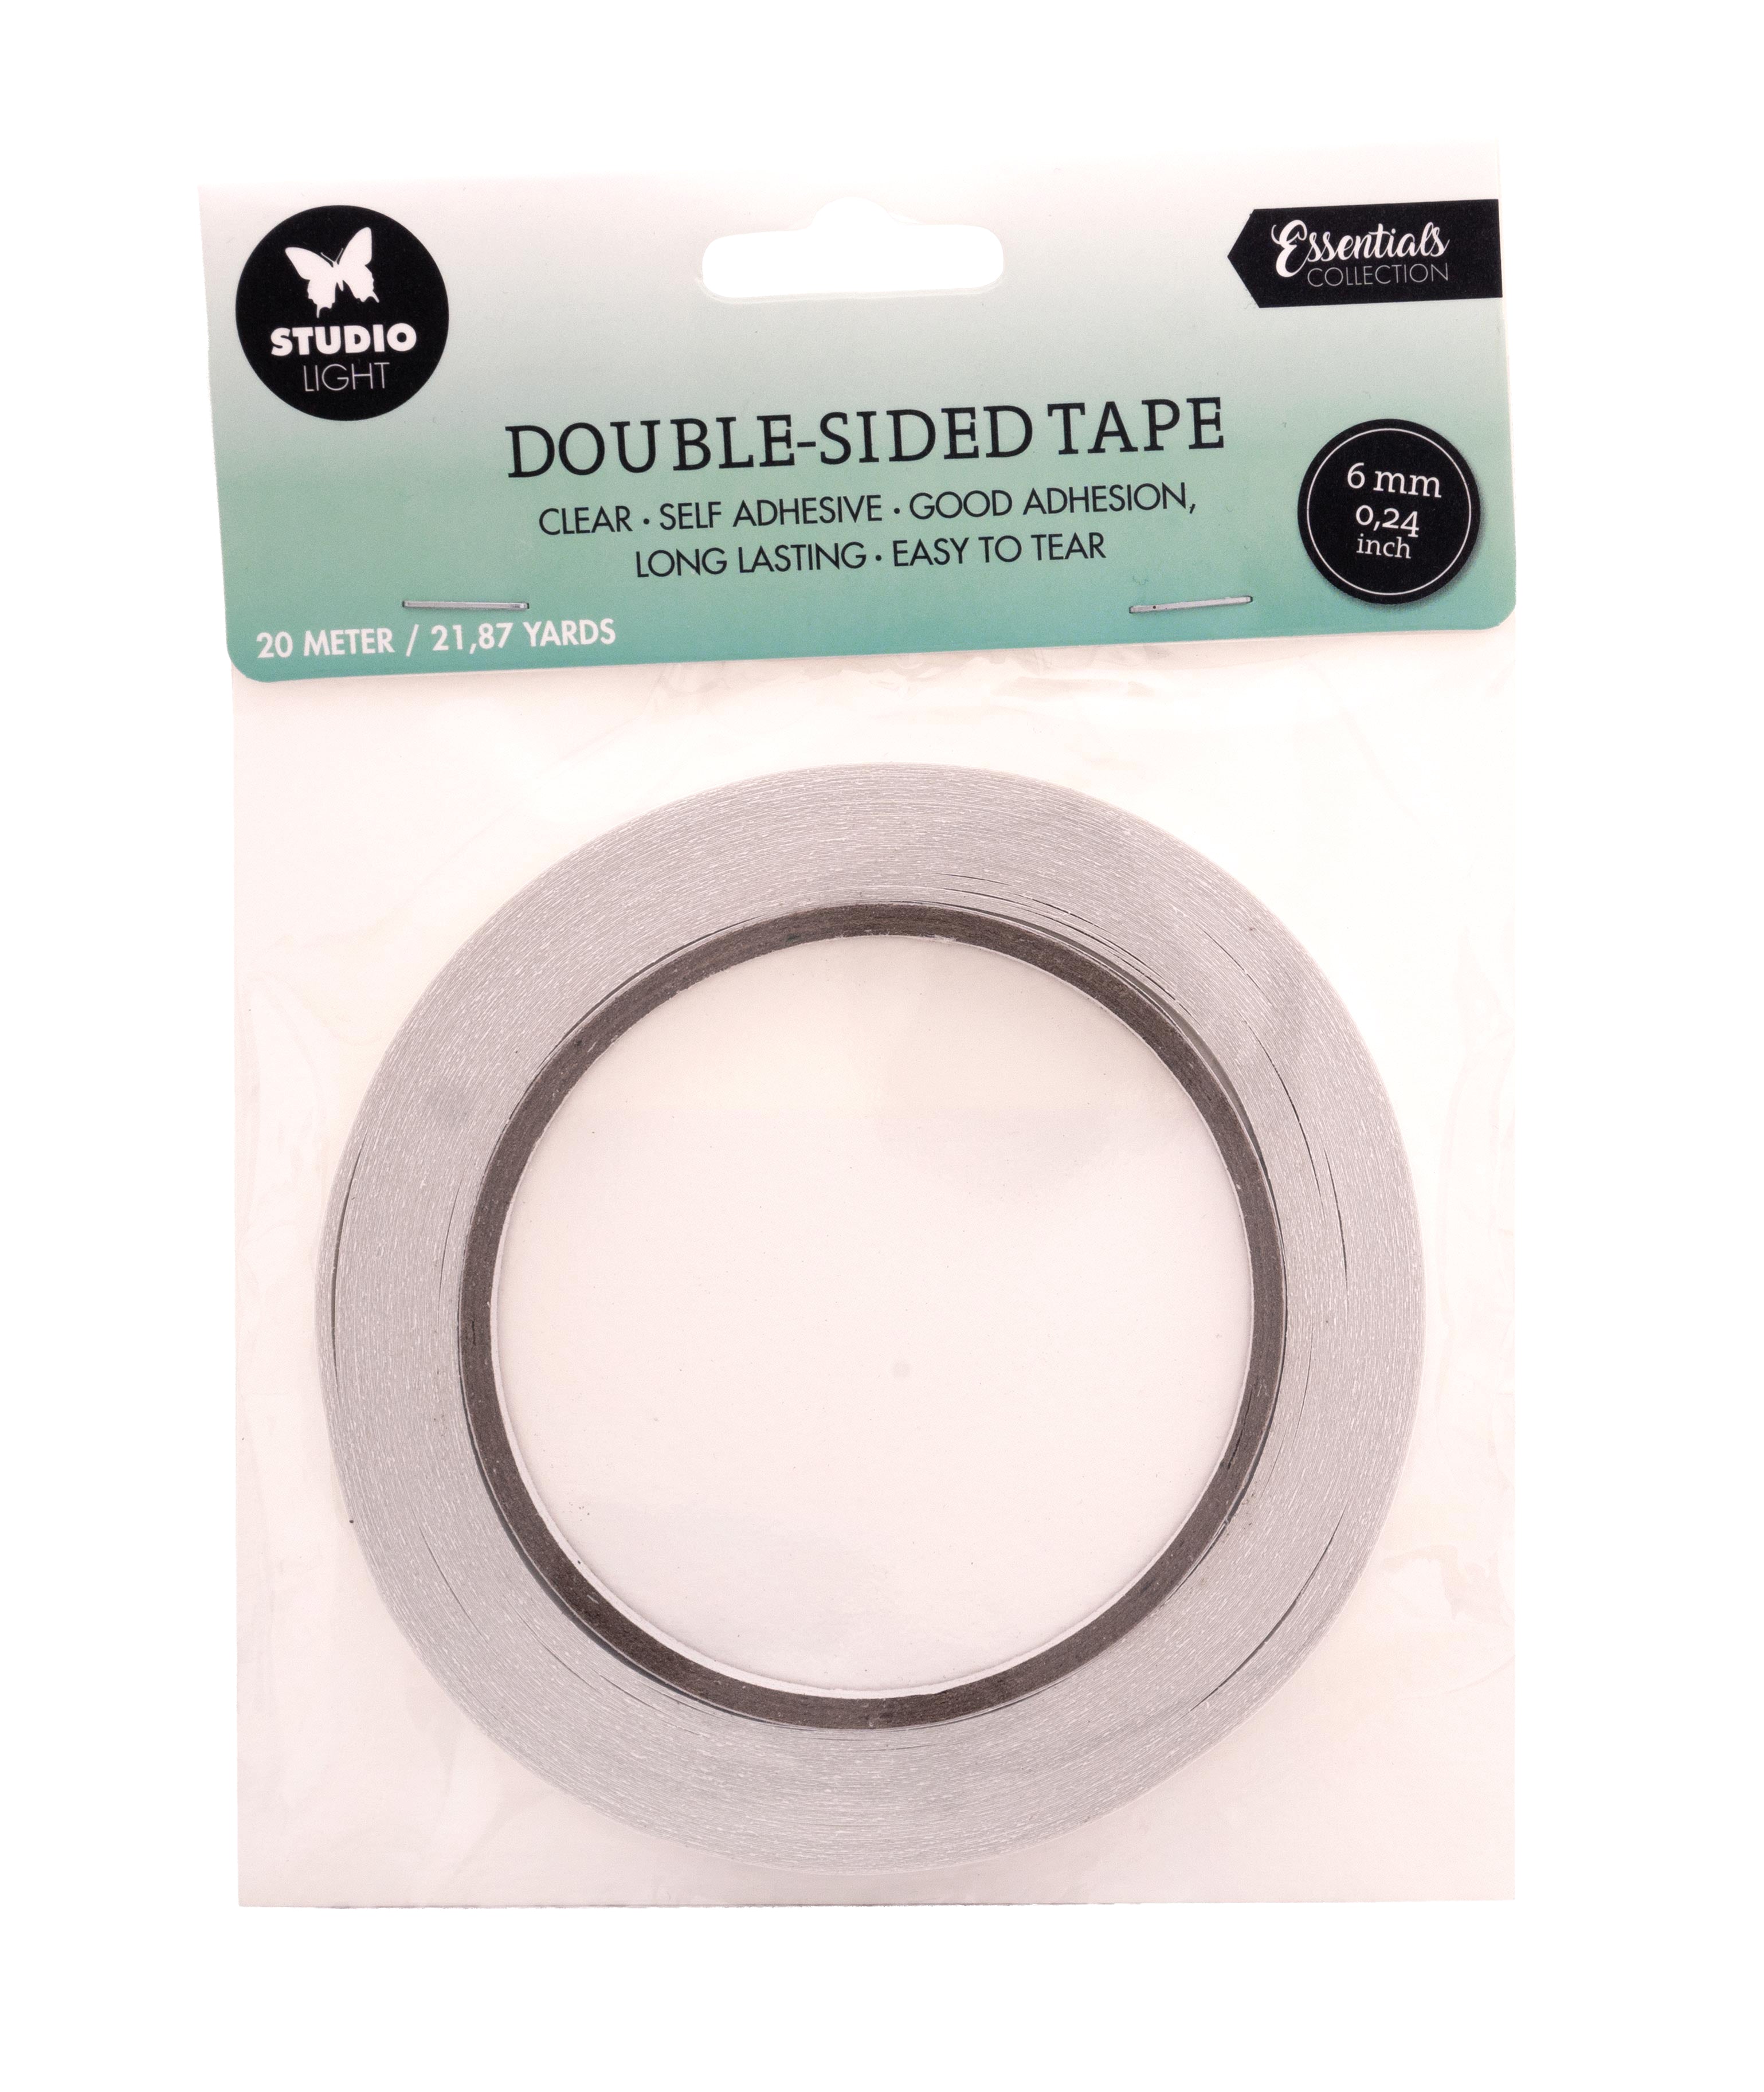 Glue Point 12mm, 2 Sided Adhesive Tape for Crafts, 1 Roll/100 Pcs - Clear